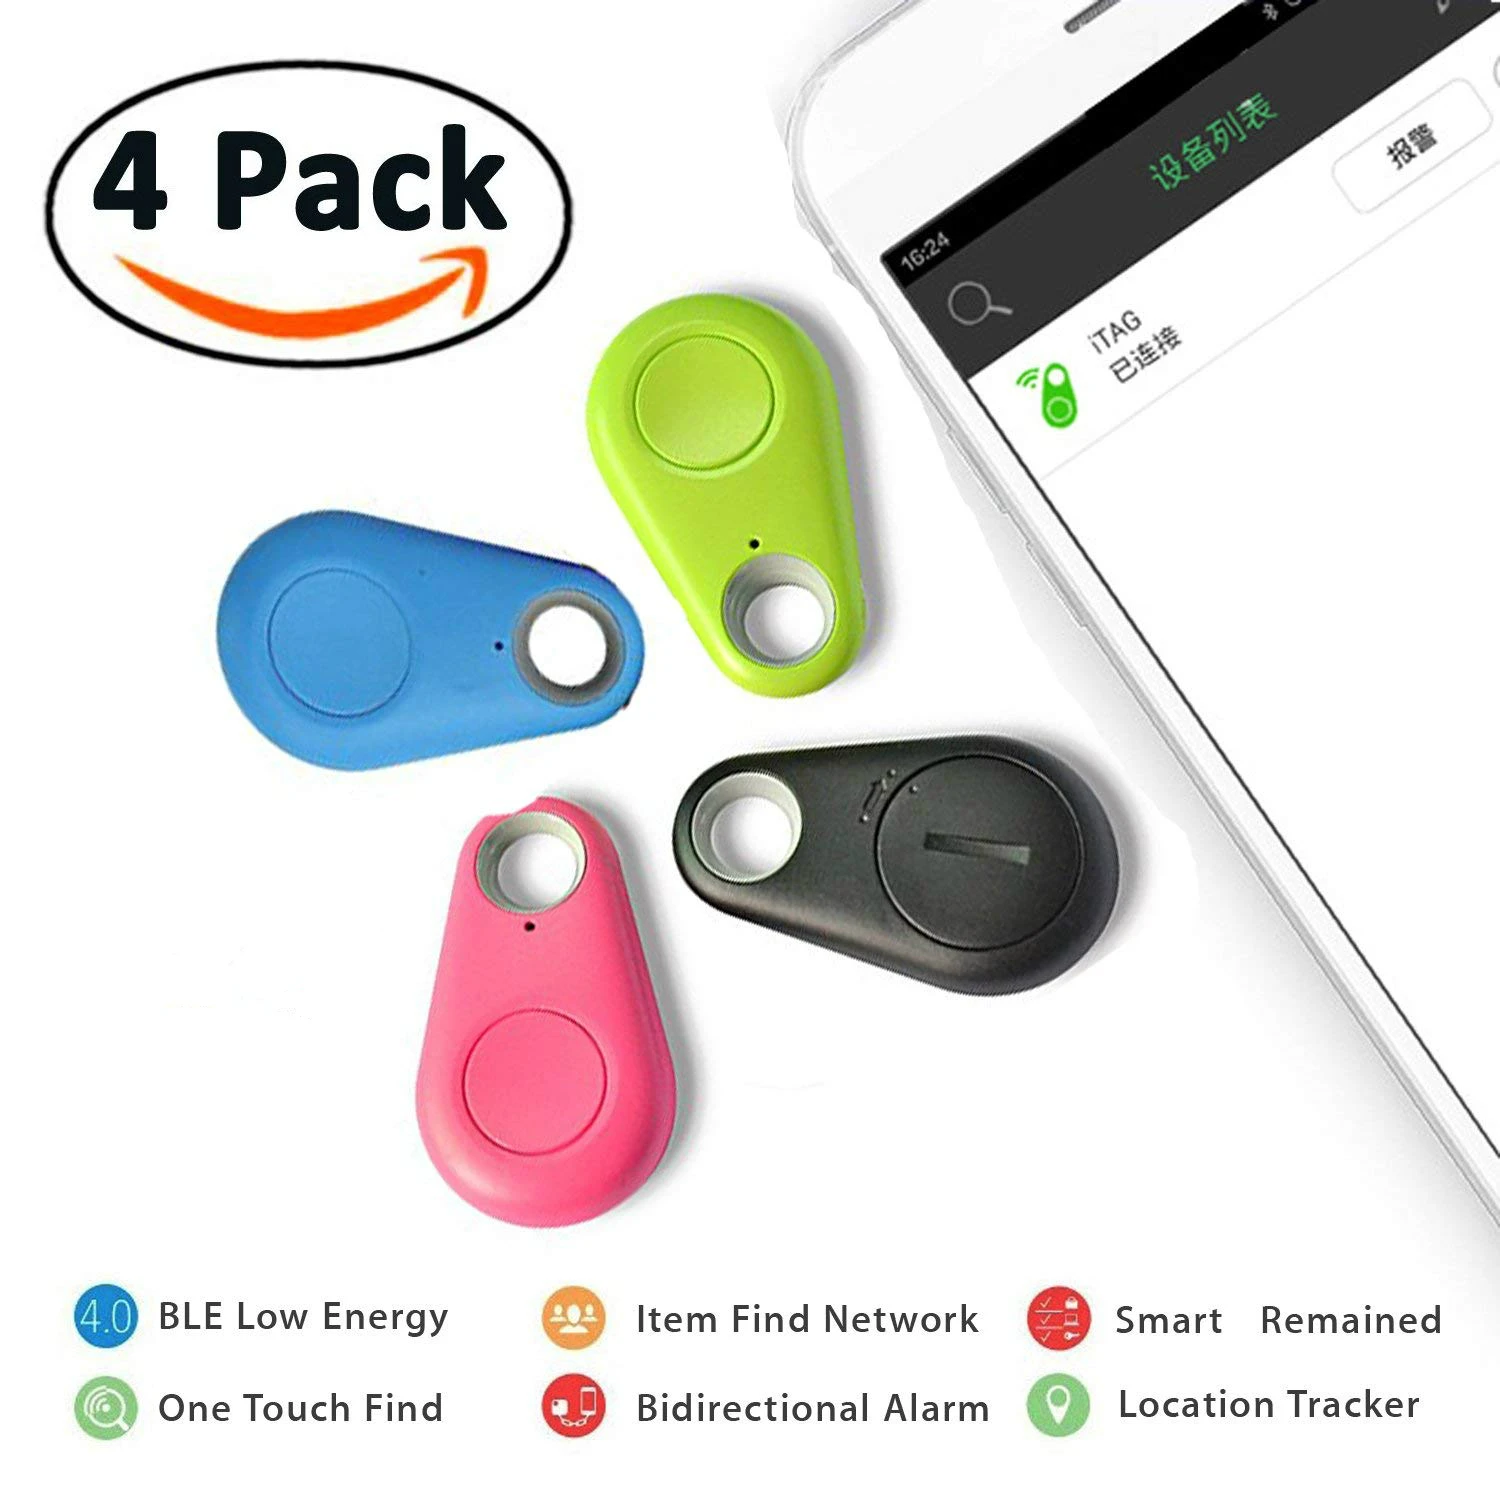 7 White+Green+Black+Pink+Blue+Yellow+Purple Tracker Smart Finder Locator Phone Alarm Anti Lost Selfie Shutter Wireless Tracking Device GPS Tracking Collar for Kids Pets Key Wallet Dog Cat Bag Car 